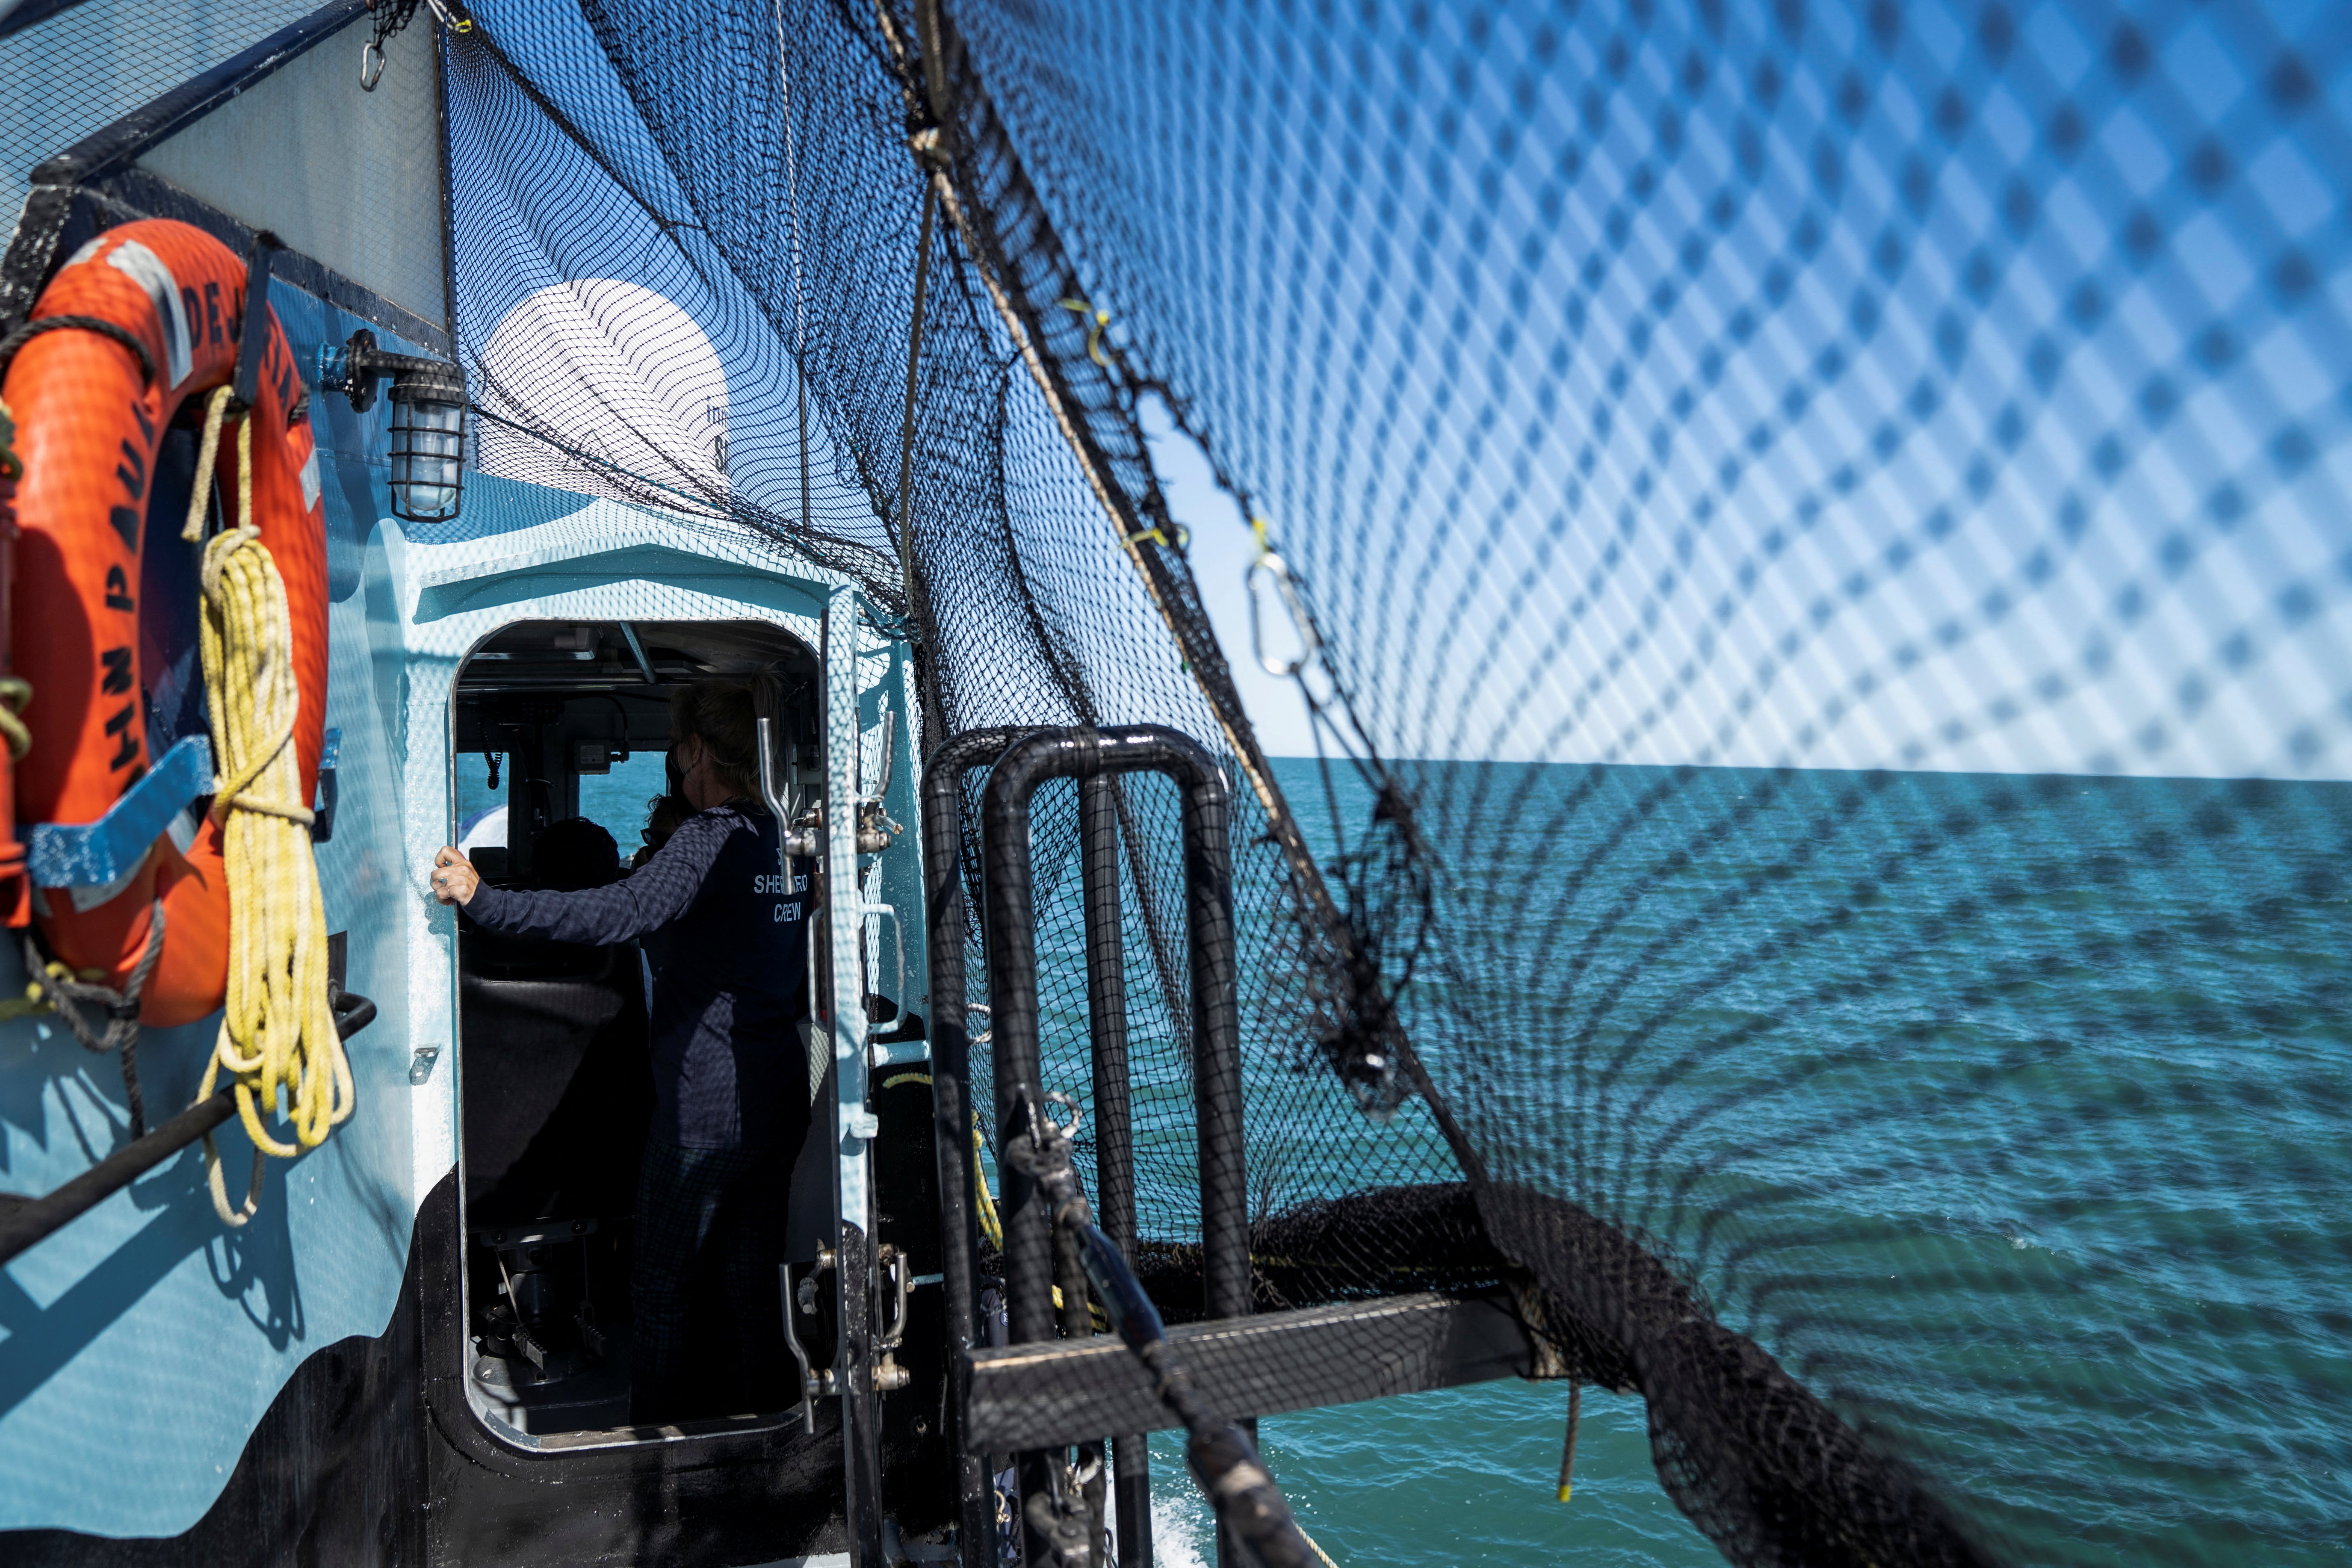 Mexico's Vaquita porpoise recovers after joint effort of Marine and Sea Shepherd